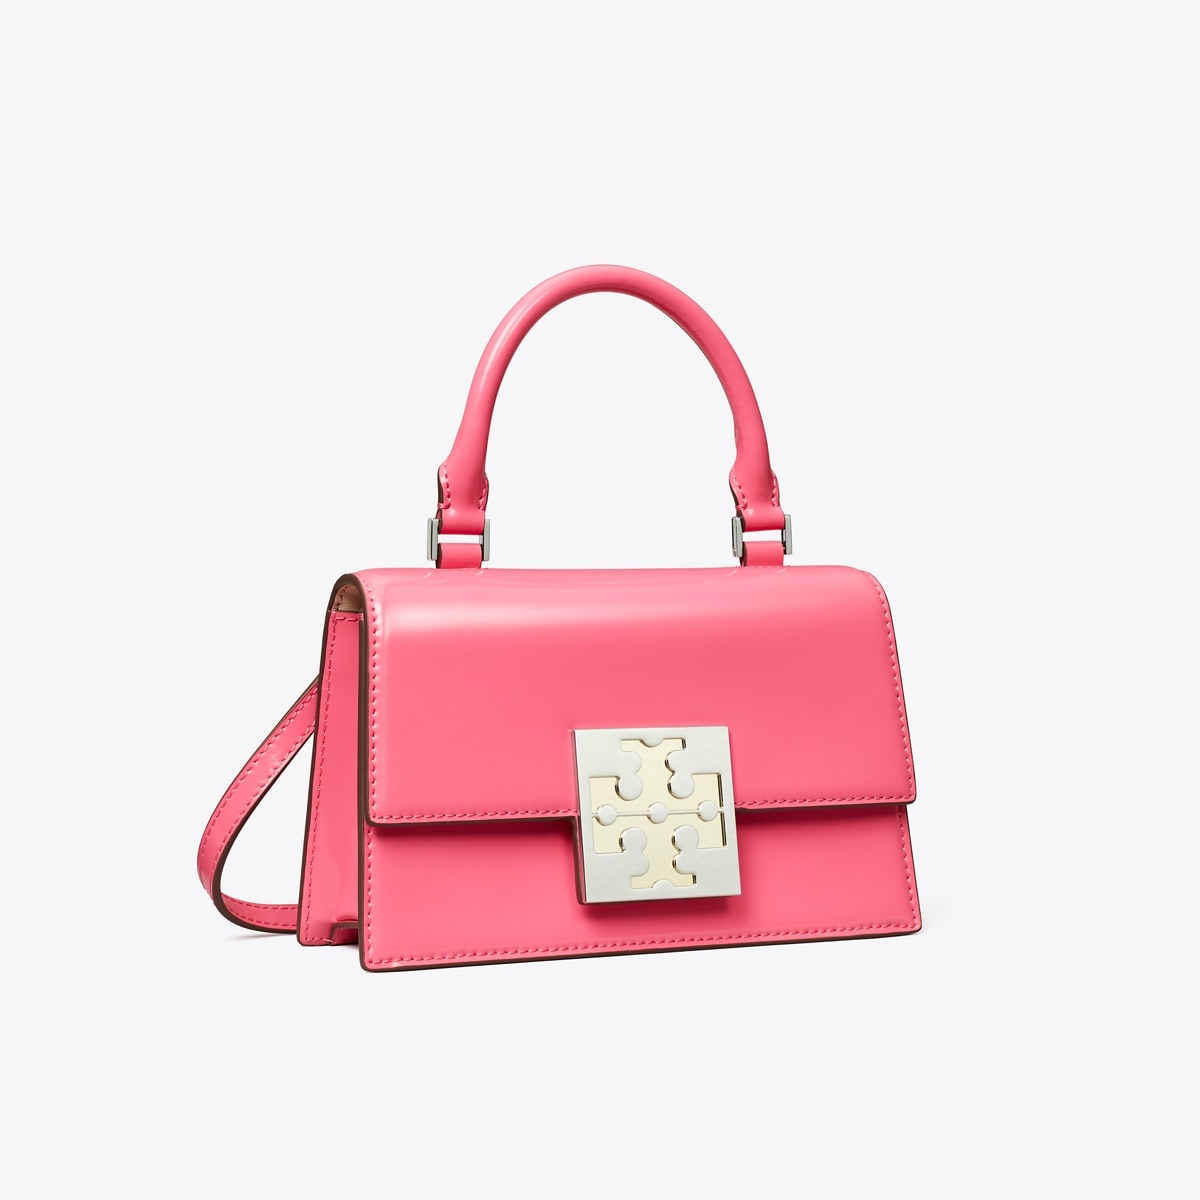 Tory Burch Shoulder Bag In Quilted Leather in Pink